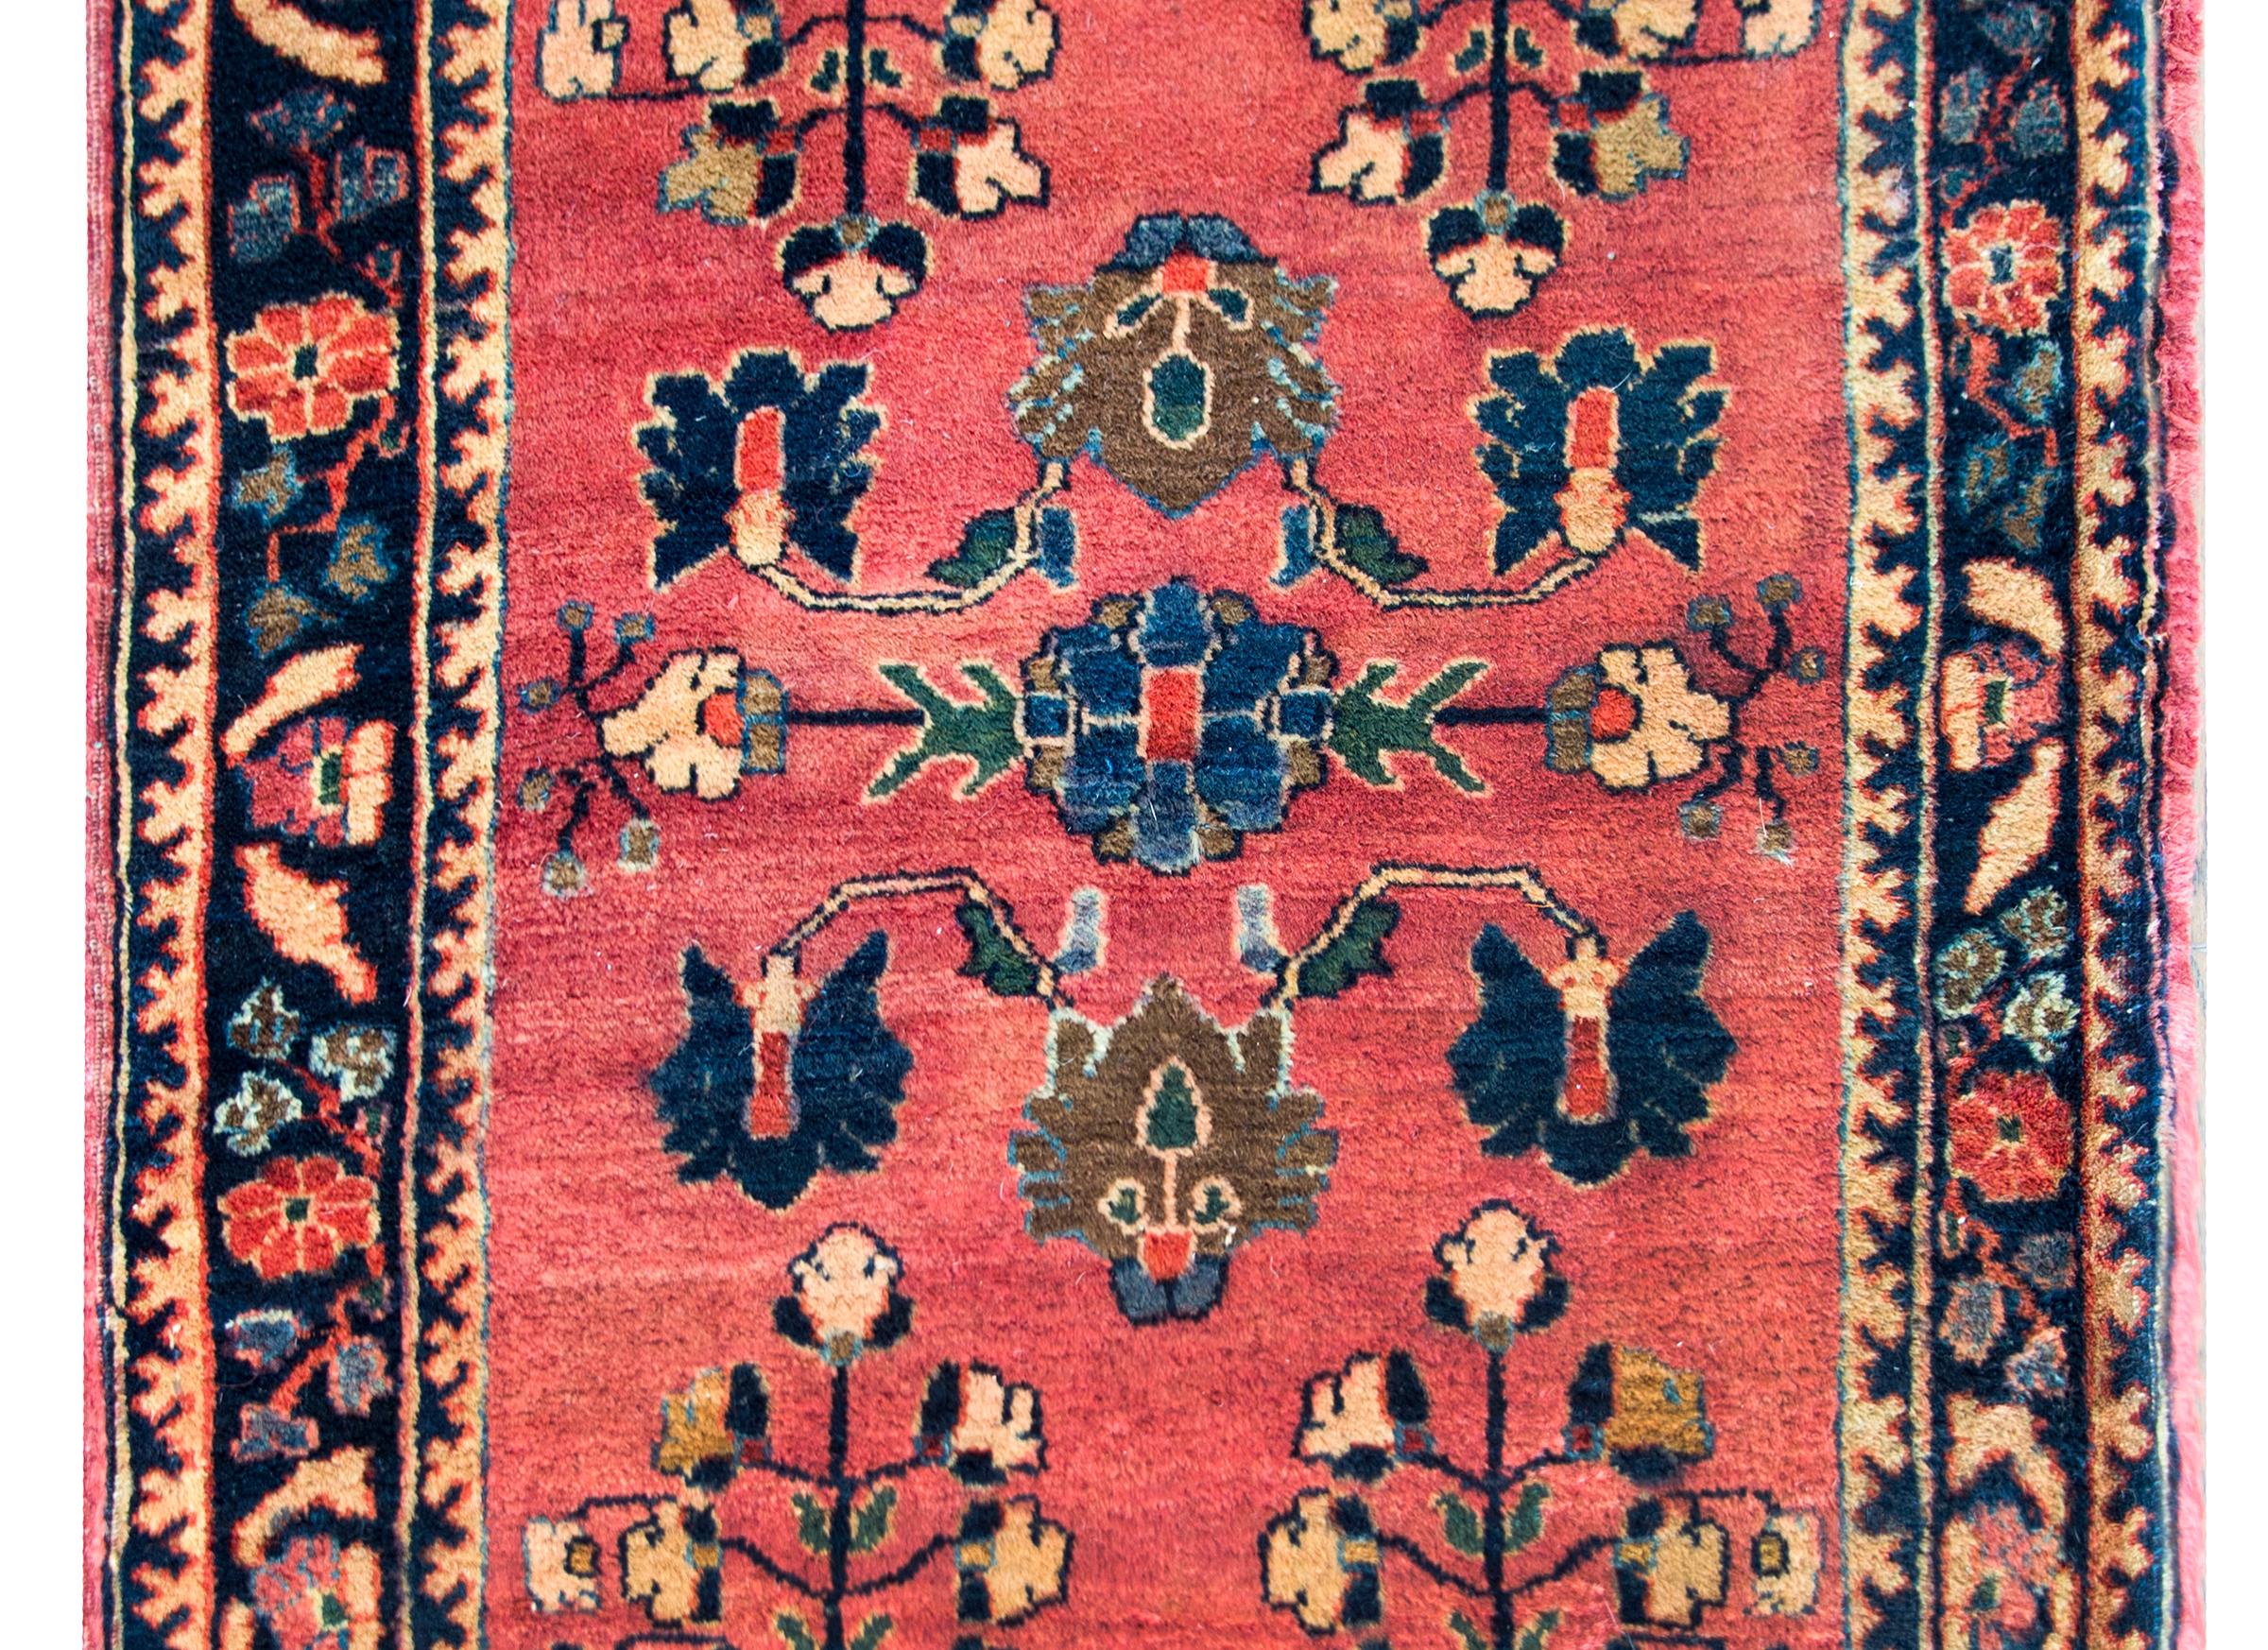 A sweet early 20th century Persian Sarouk rug with a simple but beautiful mirrored floral pattern woven in indigo, brown, green, ream, and pink, set against a pink background, and surrounded by a wonderful stylized floral border flanked by more